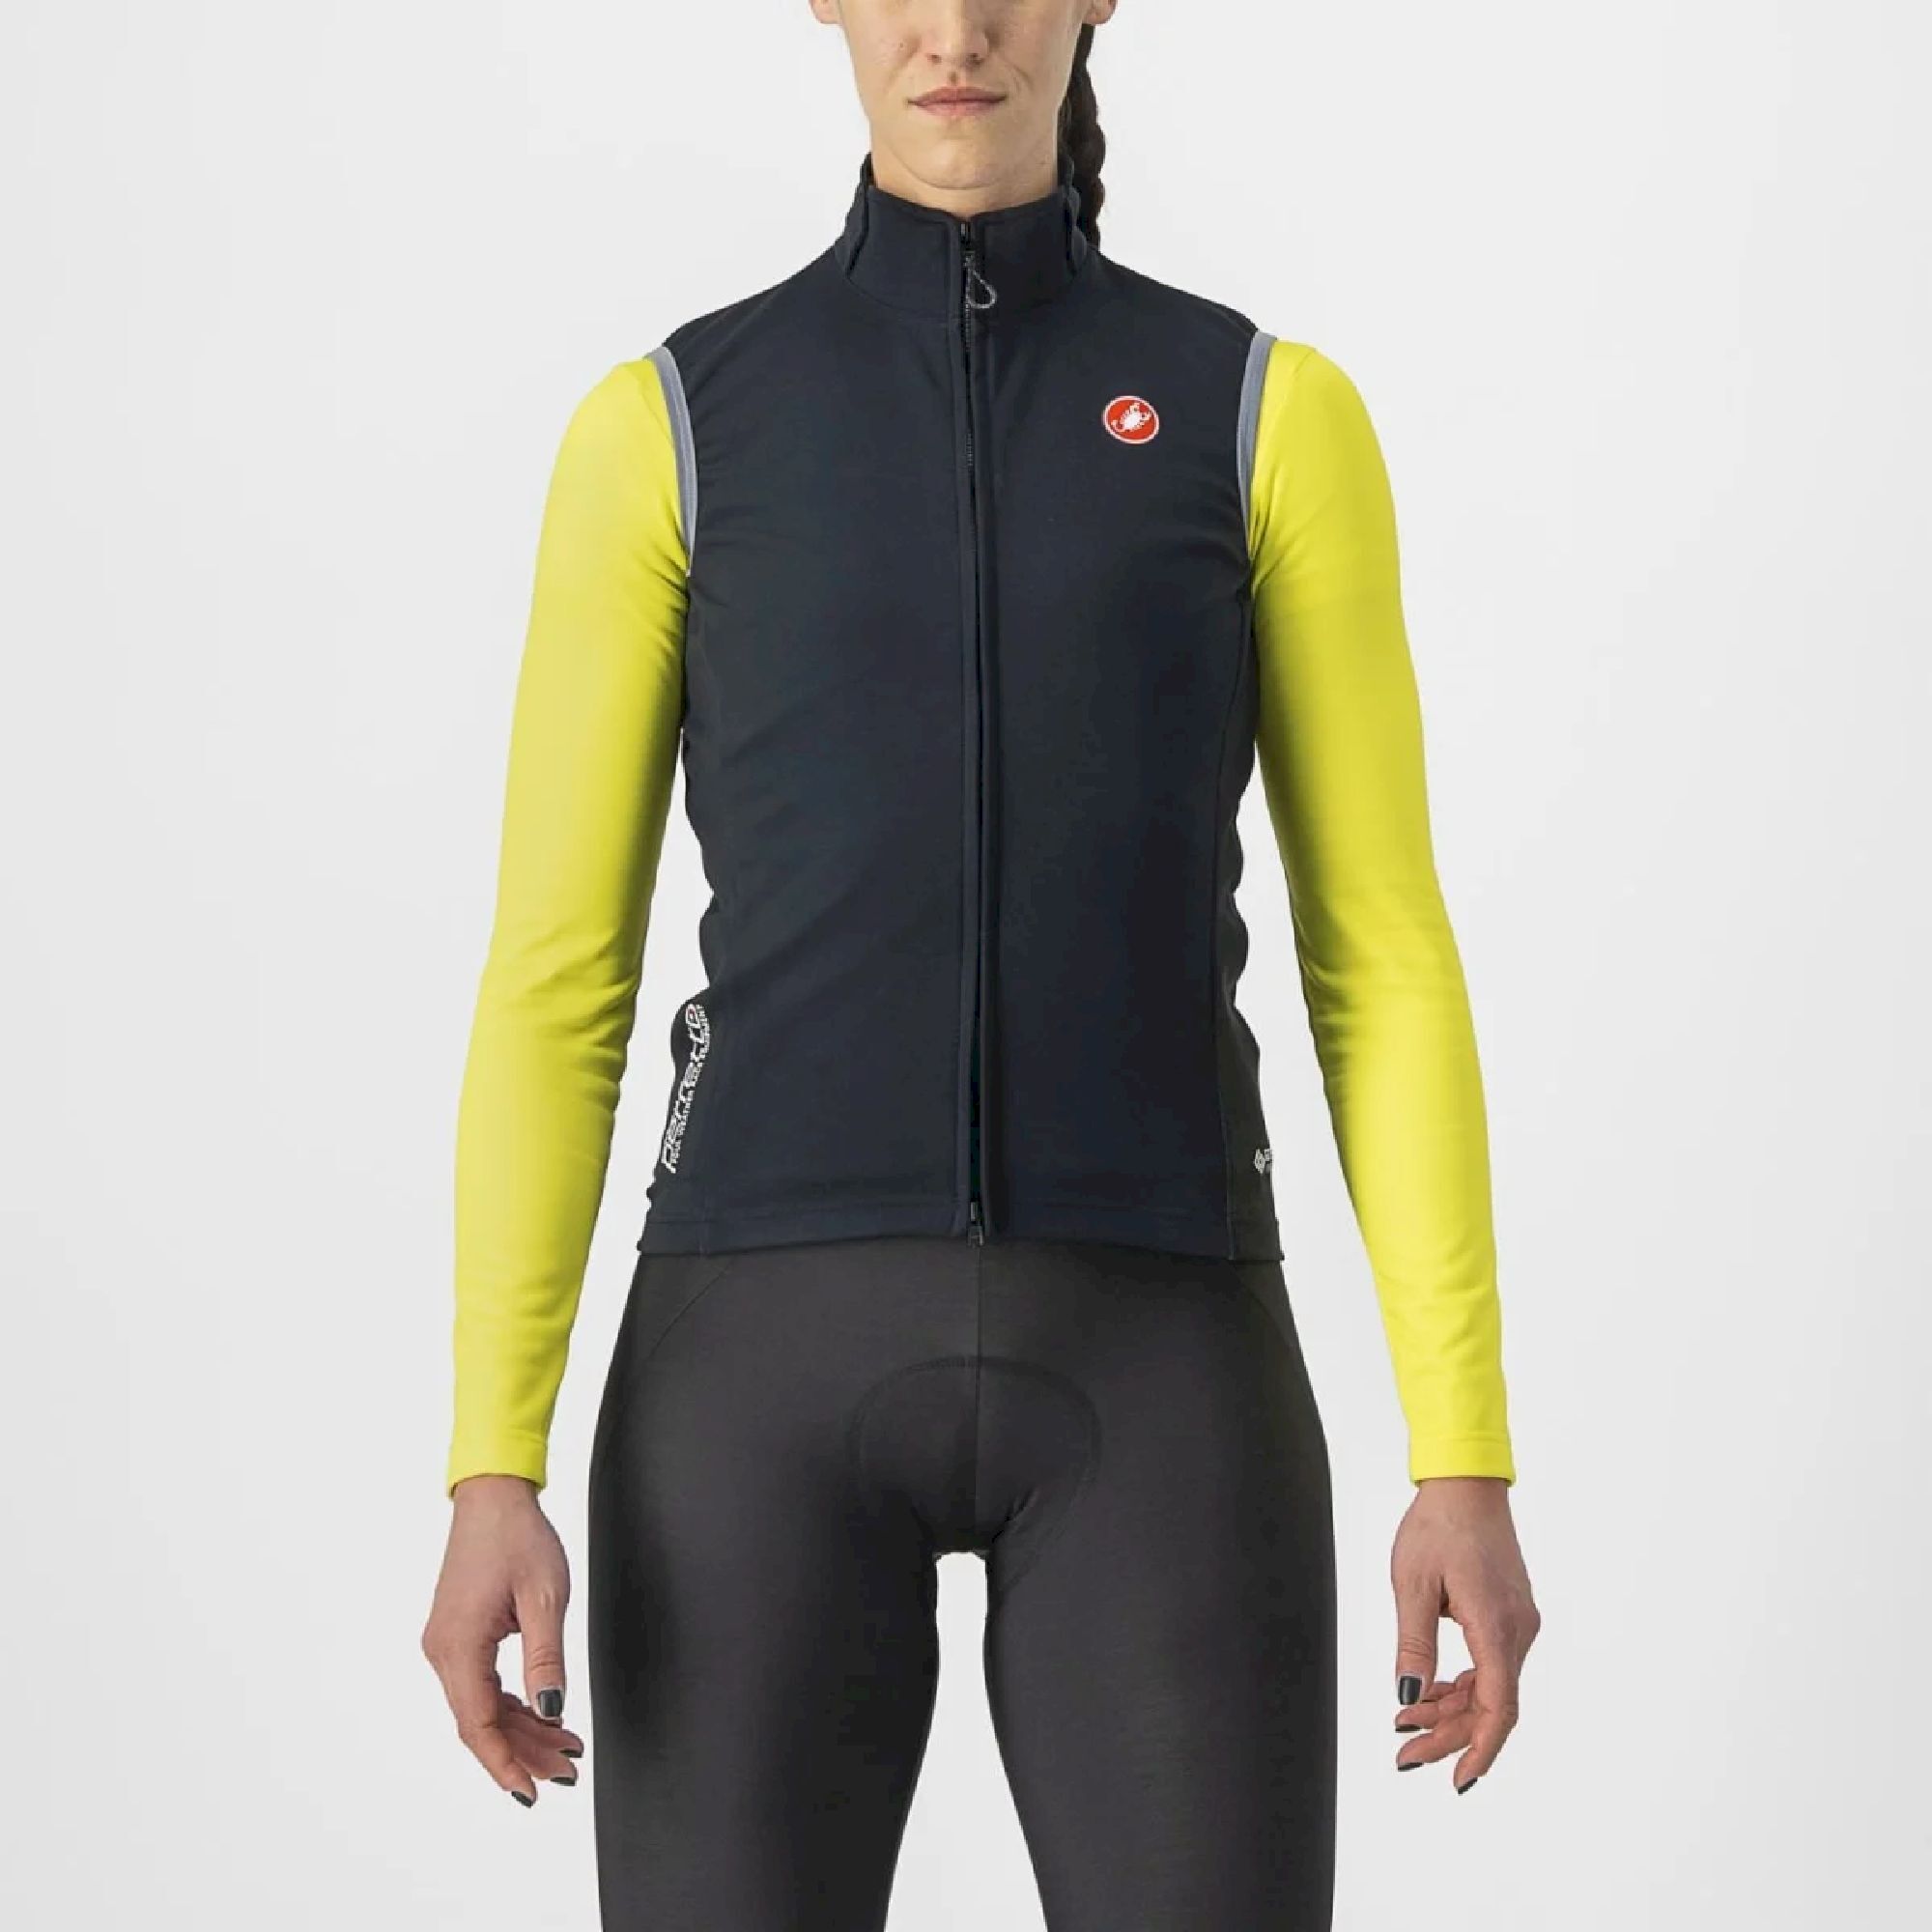 Castelli Perfetto RoS 2 W Vest - Cycling vest - Women's | Hardloop